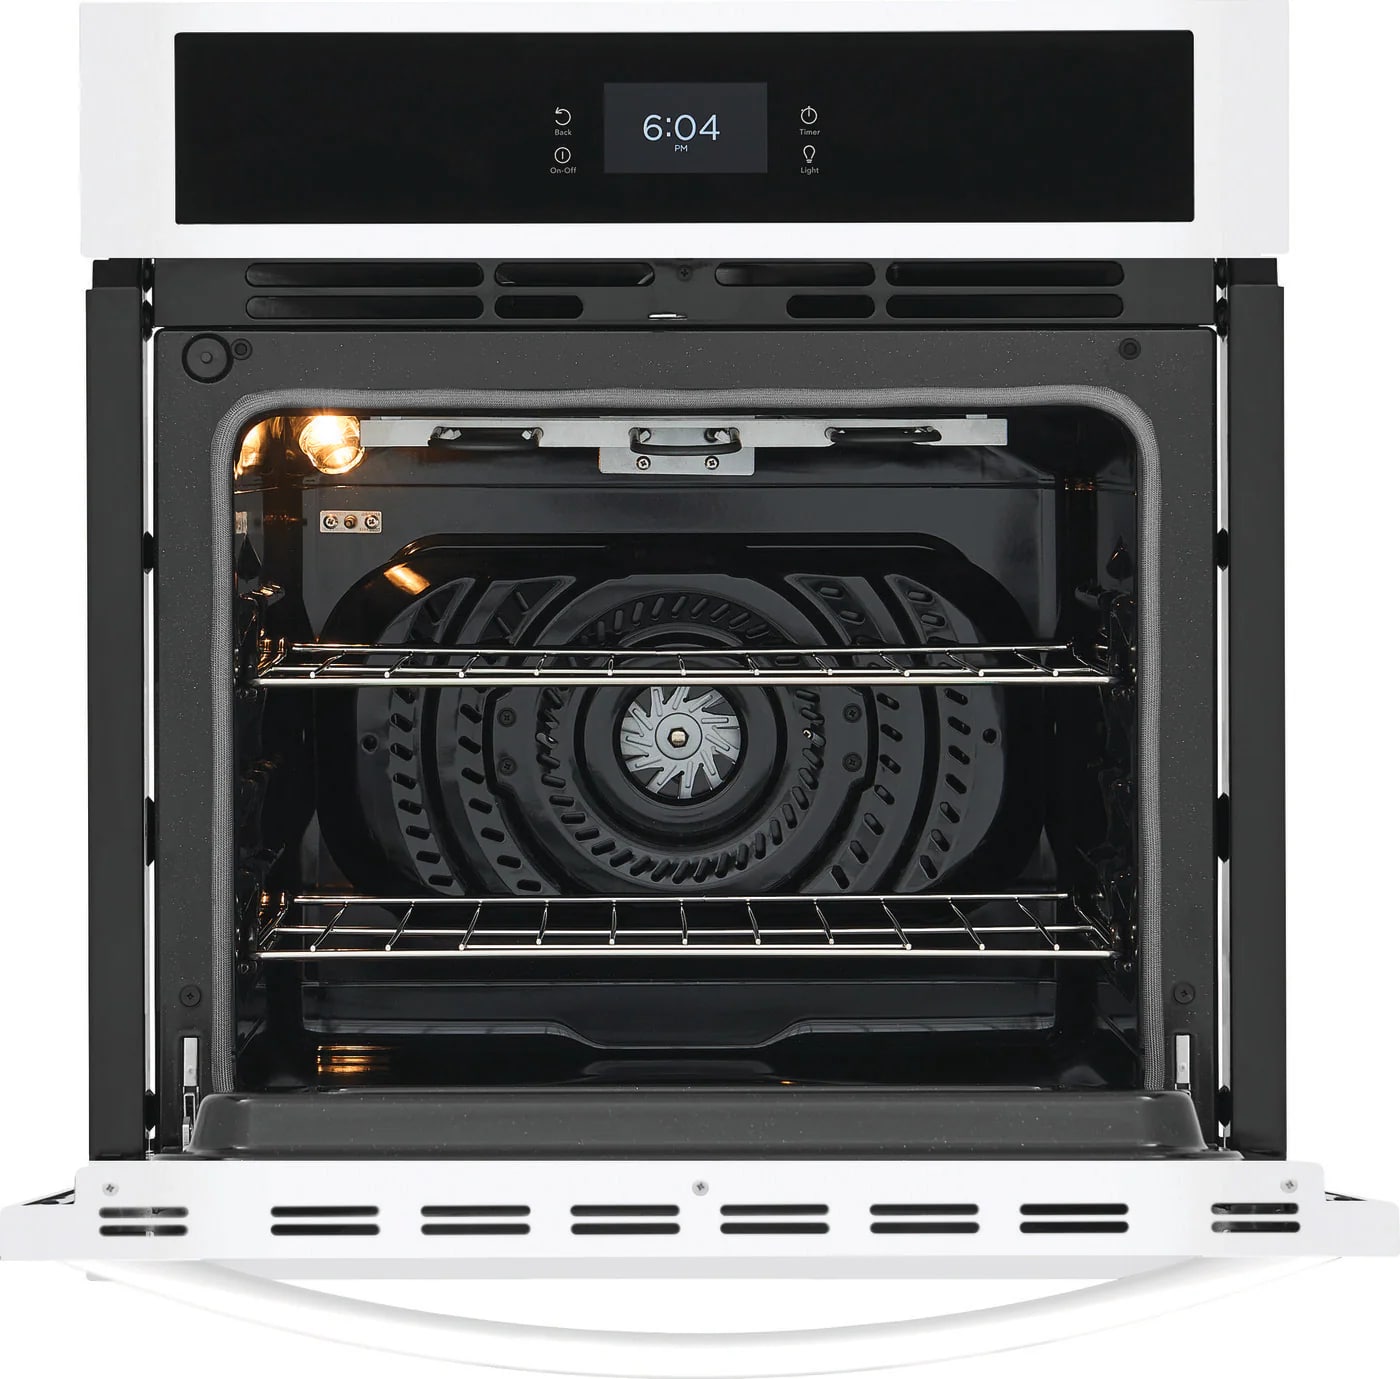 Frigidaire - 3.8 cu. ft Single Wall Oven in White - FCWS2727AW